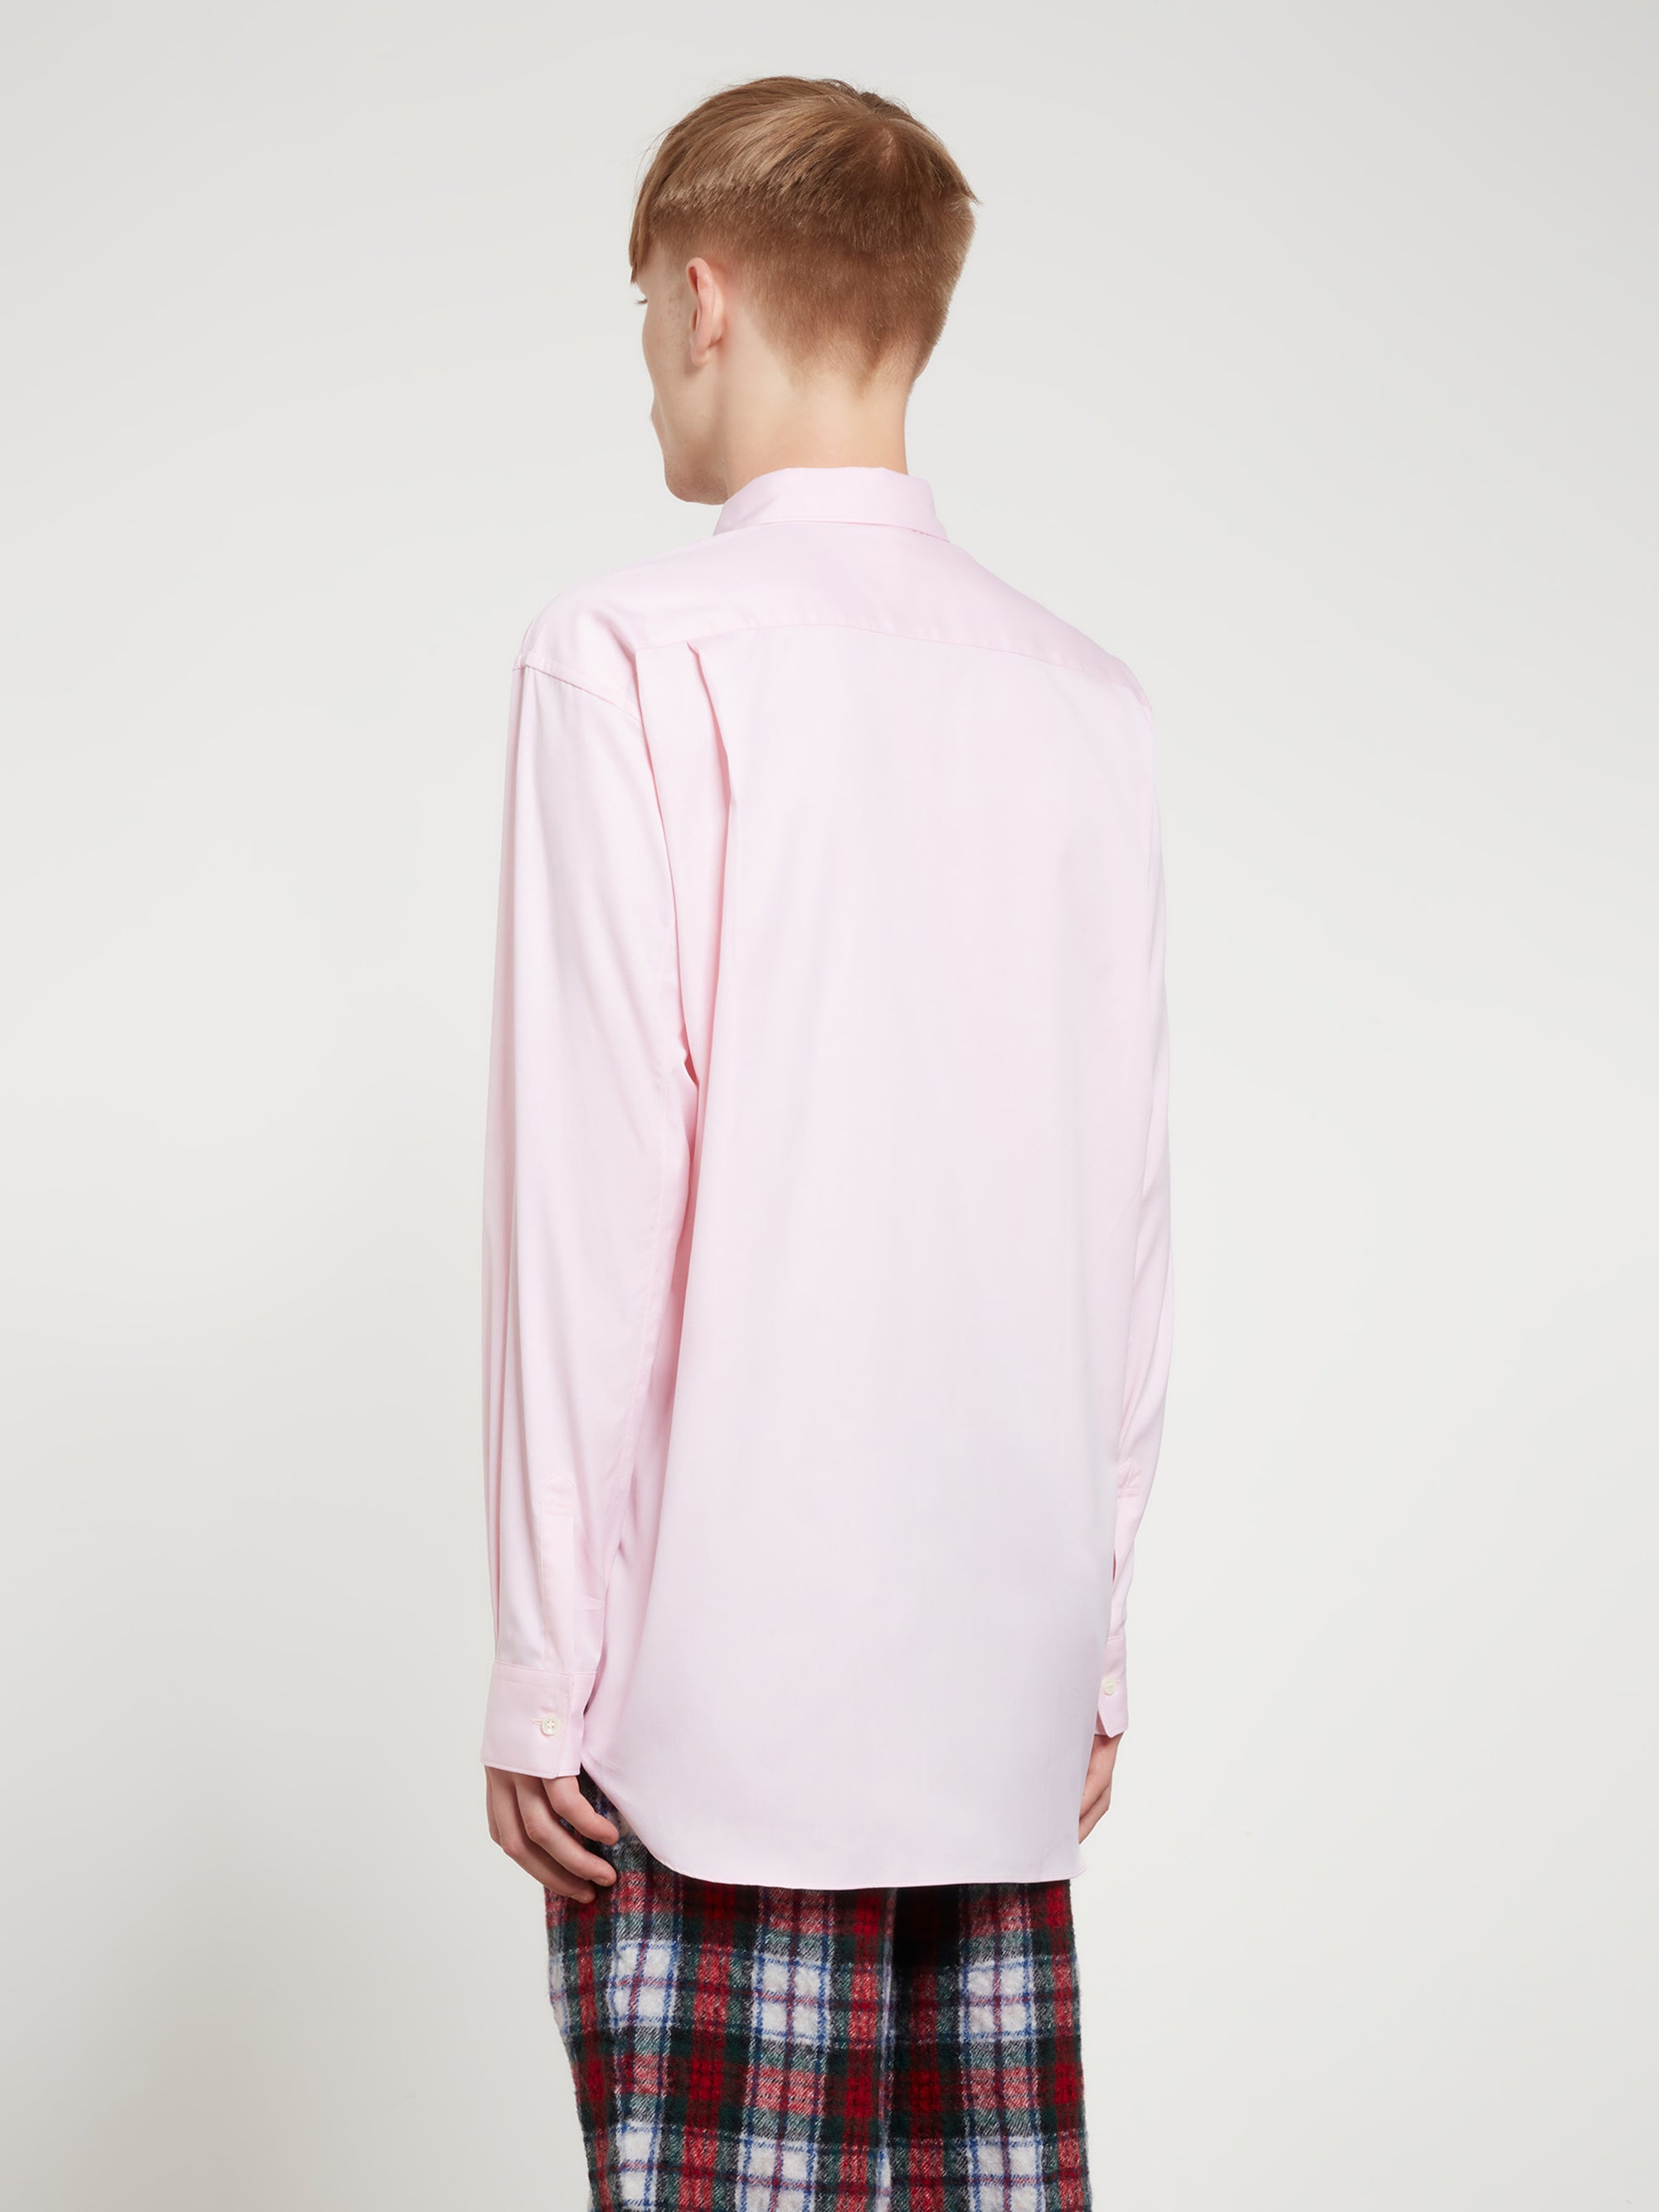 CDG Shirt Forever - Classic Fit Woven Cotton Shirt - (Pink) view 4